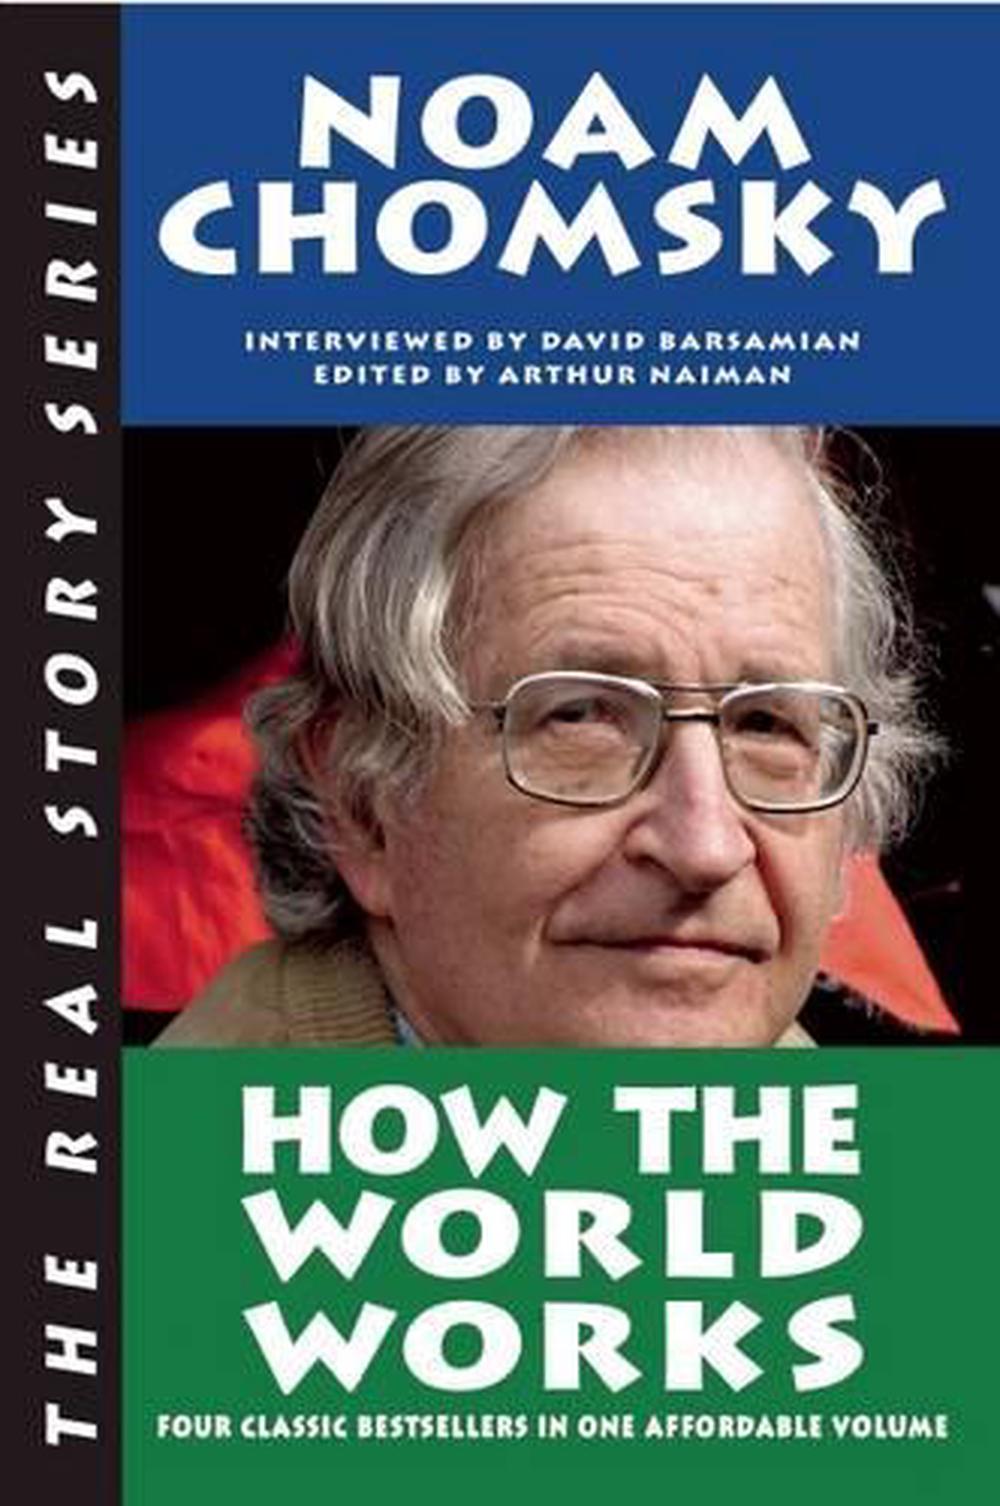 How the World Works by Noam Chomsky (English) Paperback Book Free Shipping! 9781593764272 eBay